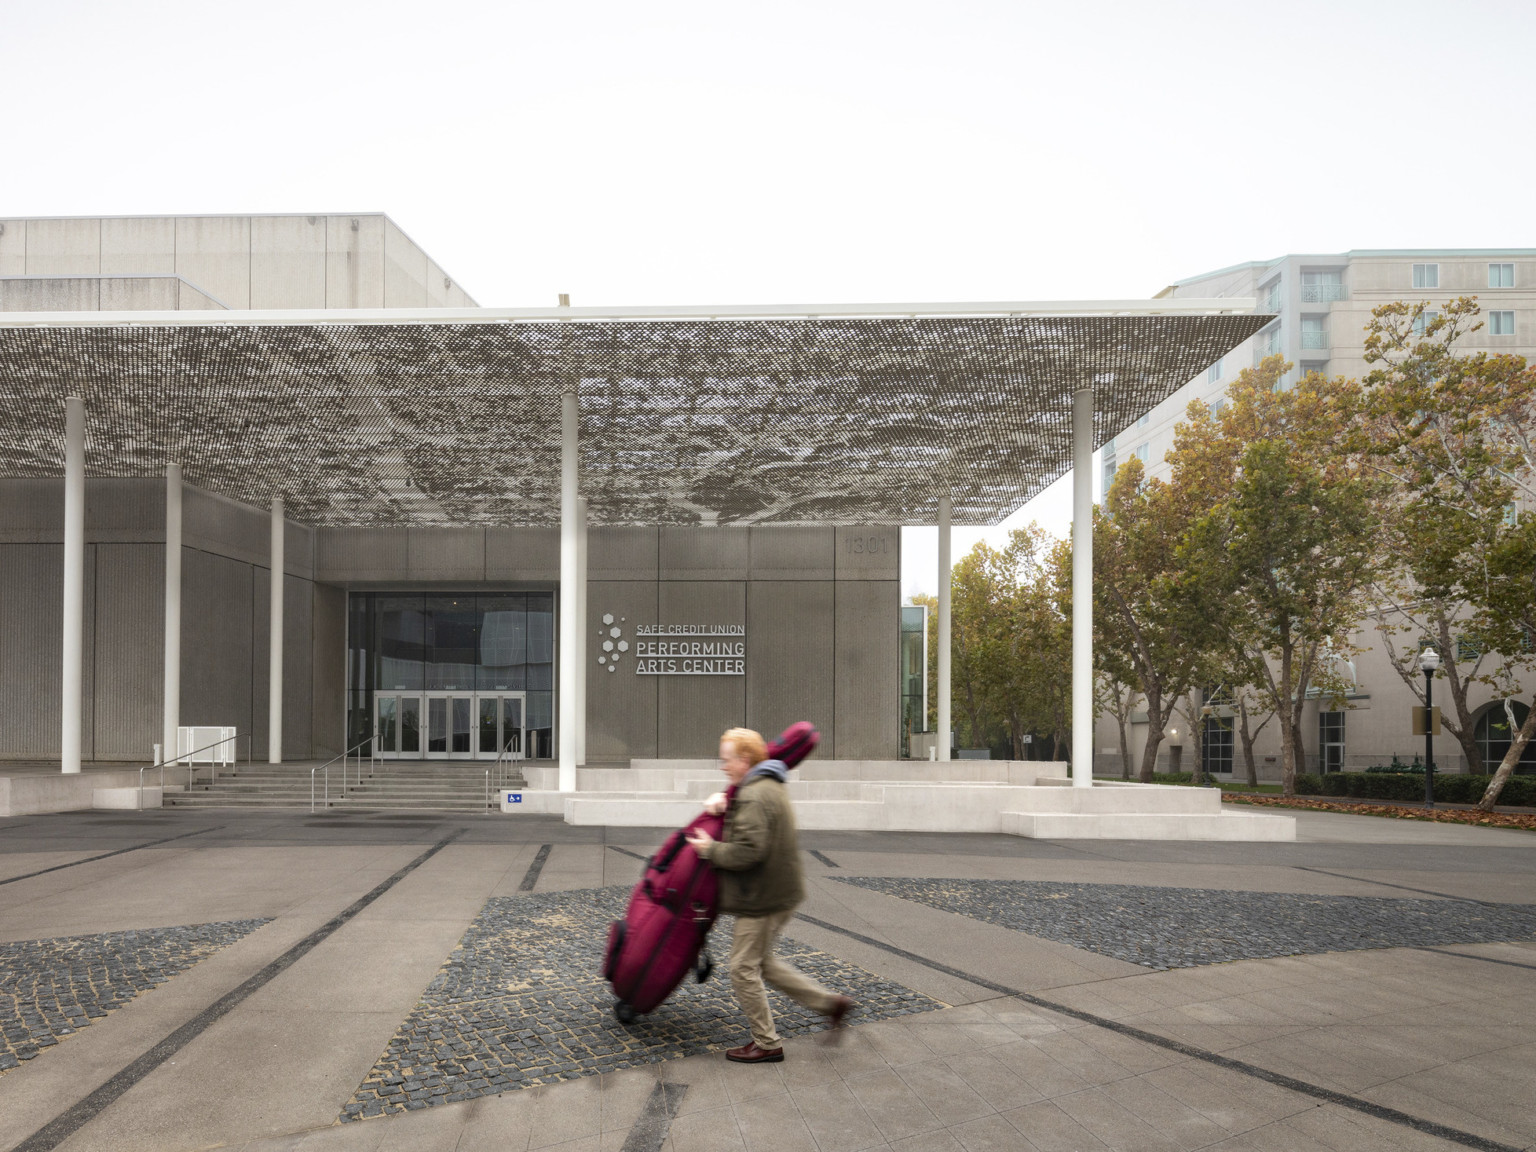 Walkway with geometric shapes in front of theatre entrance with a white perforated awning